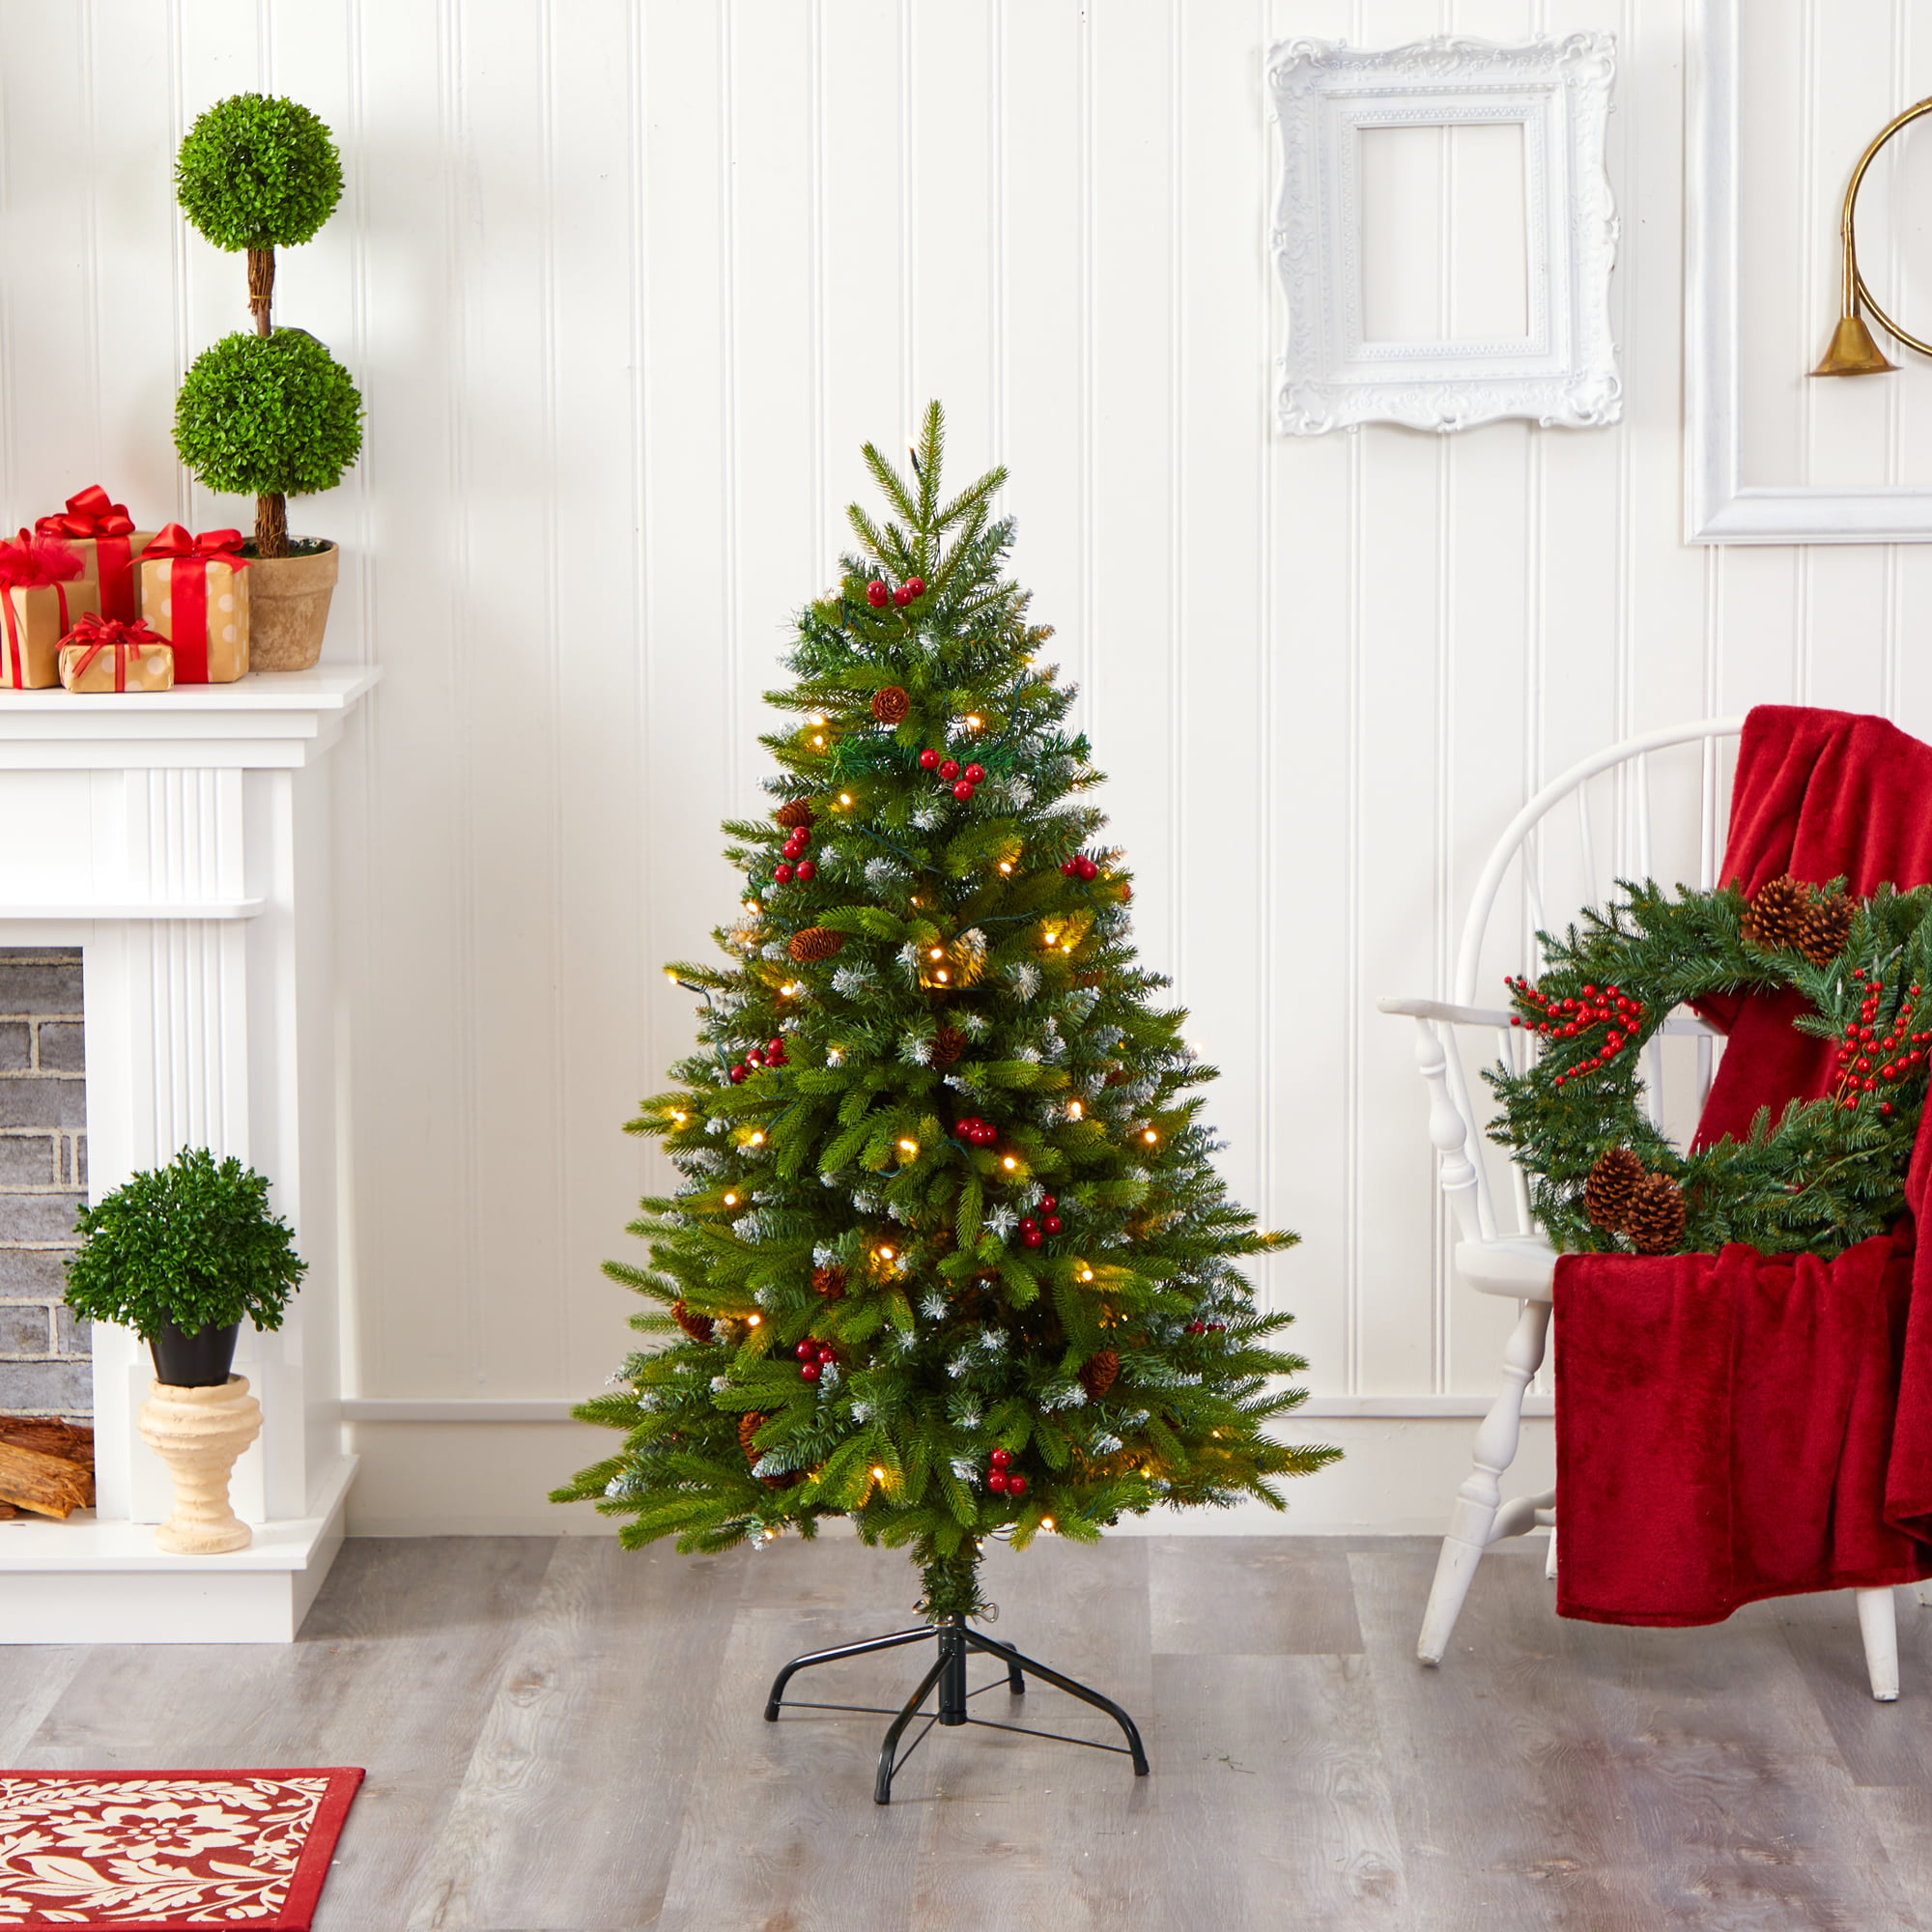 Get ready for Christmas 2021 with an artificial Christmas tree from Portland Fir.